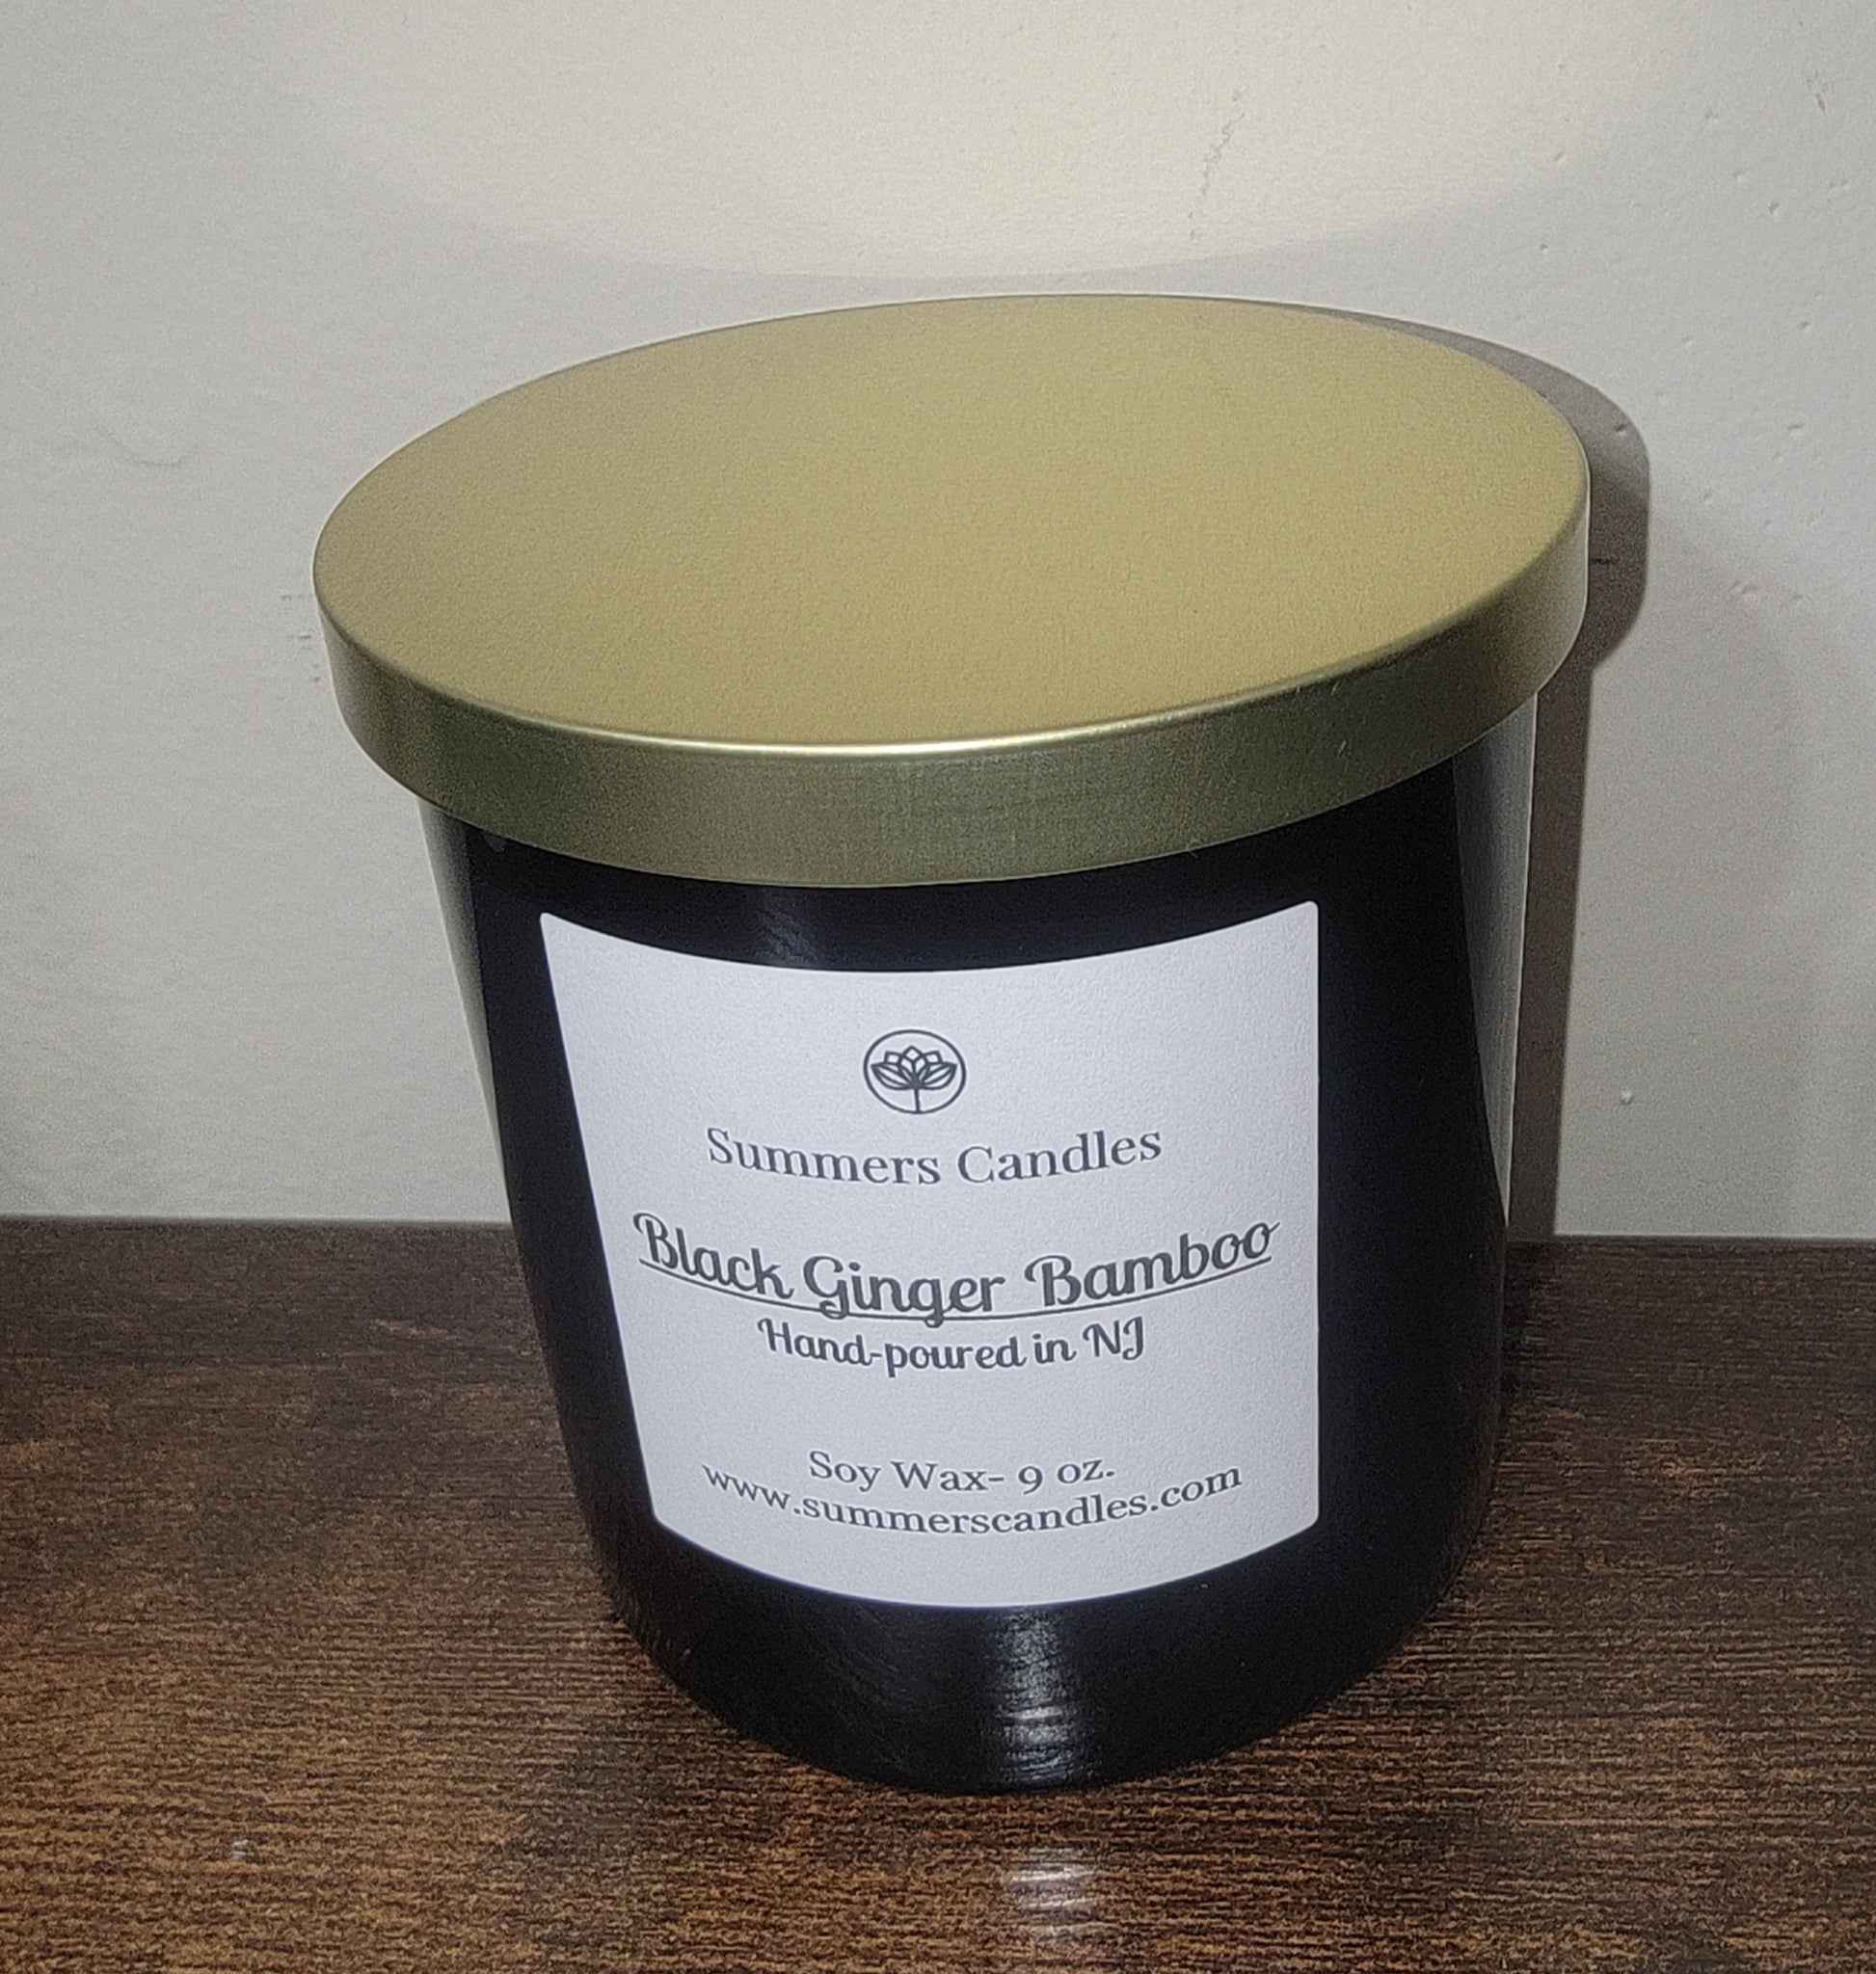 Black Ginger Bamboo - Summers Candles